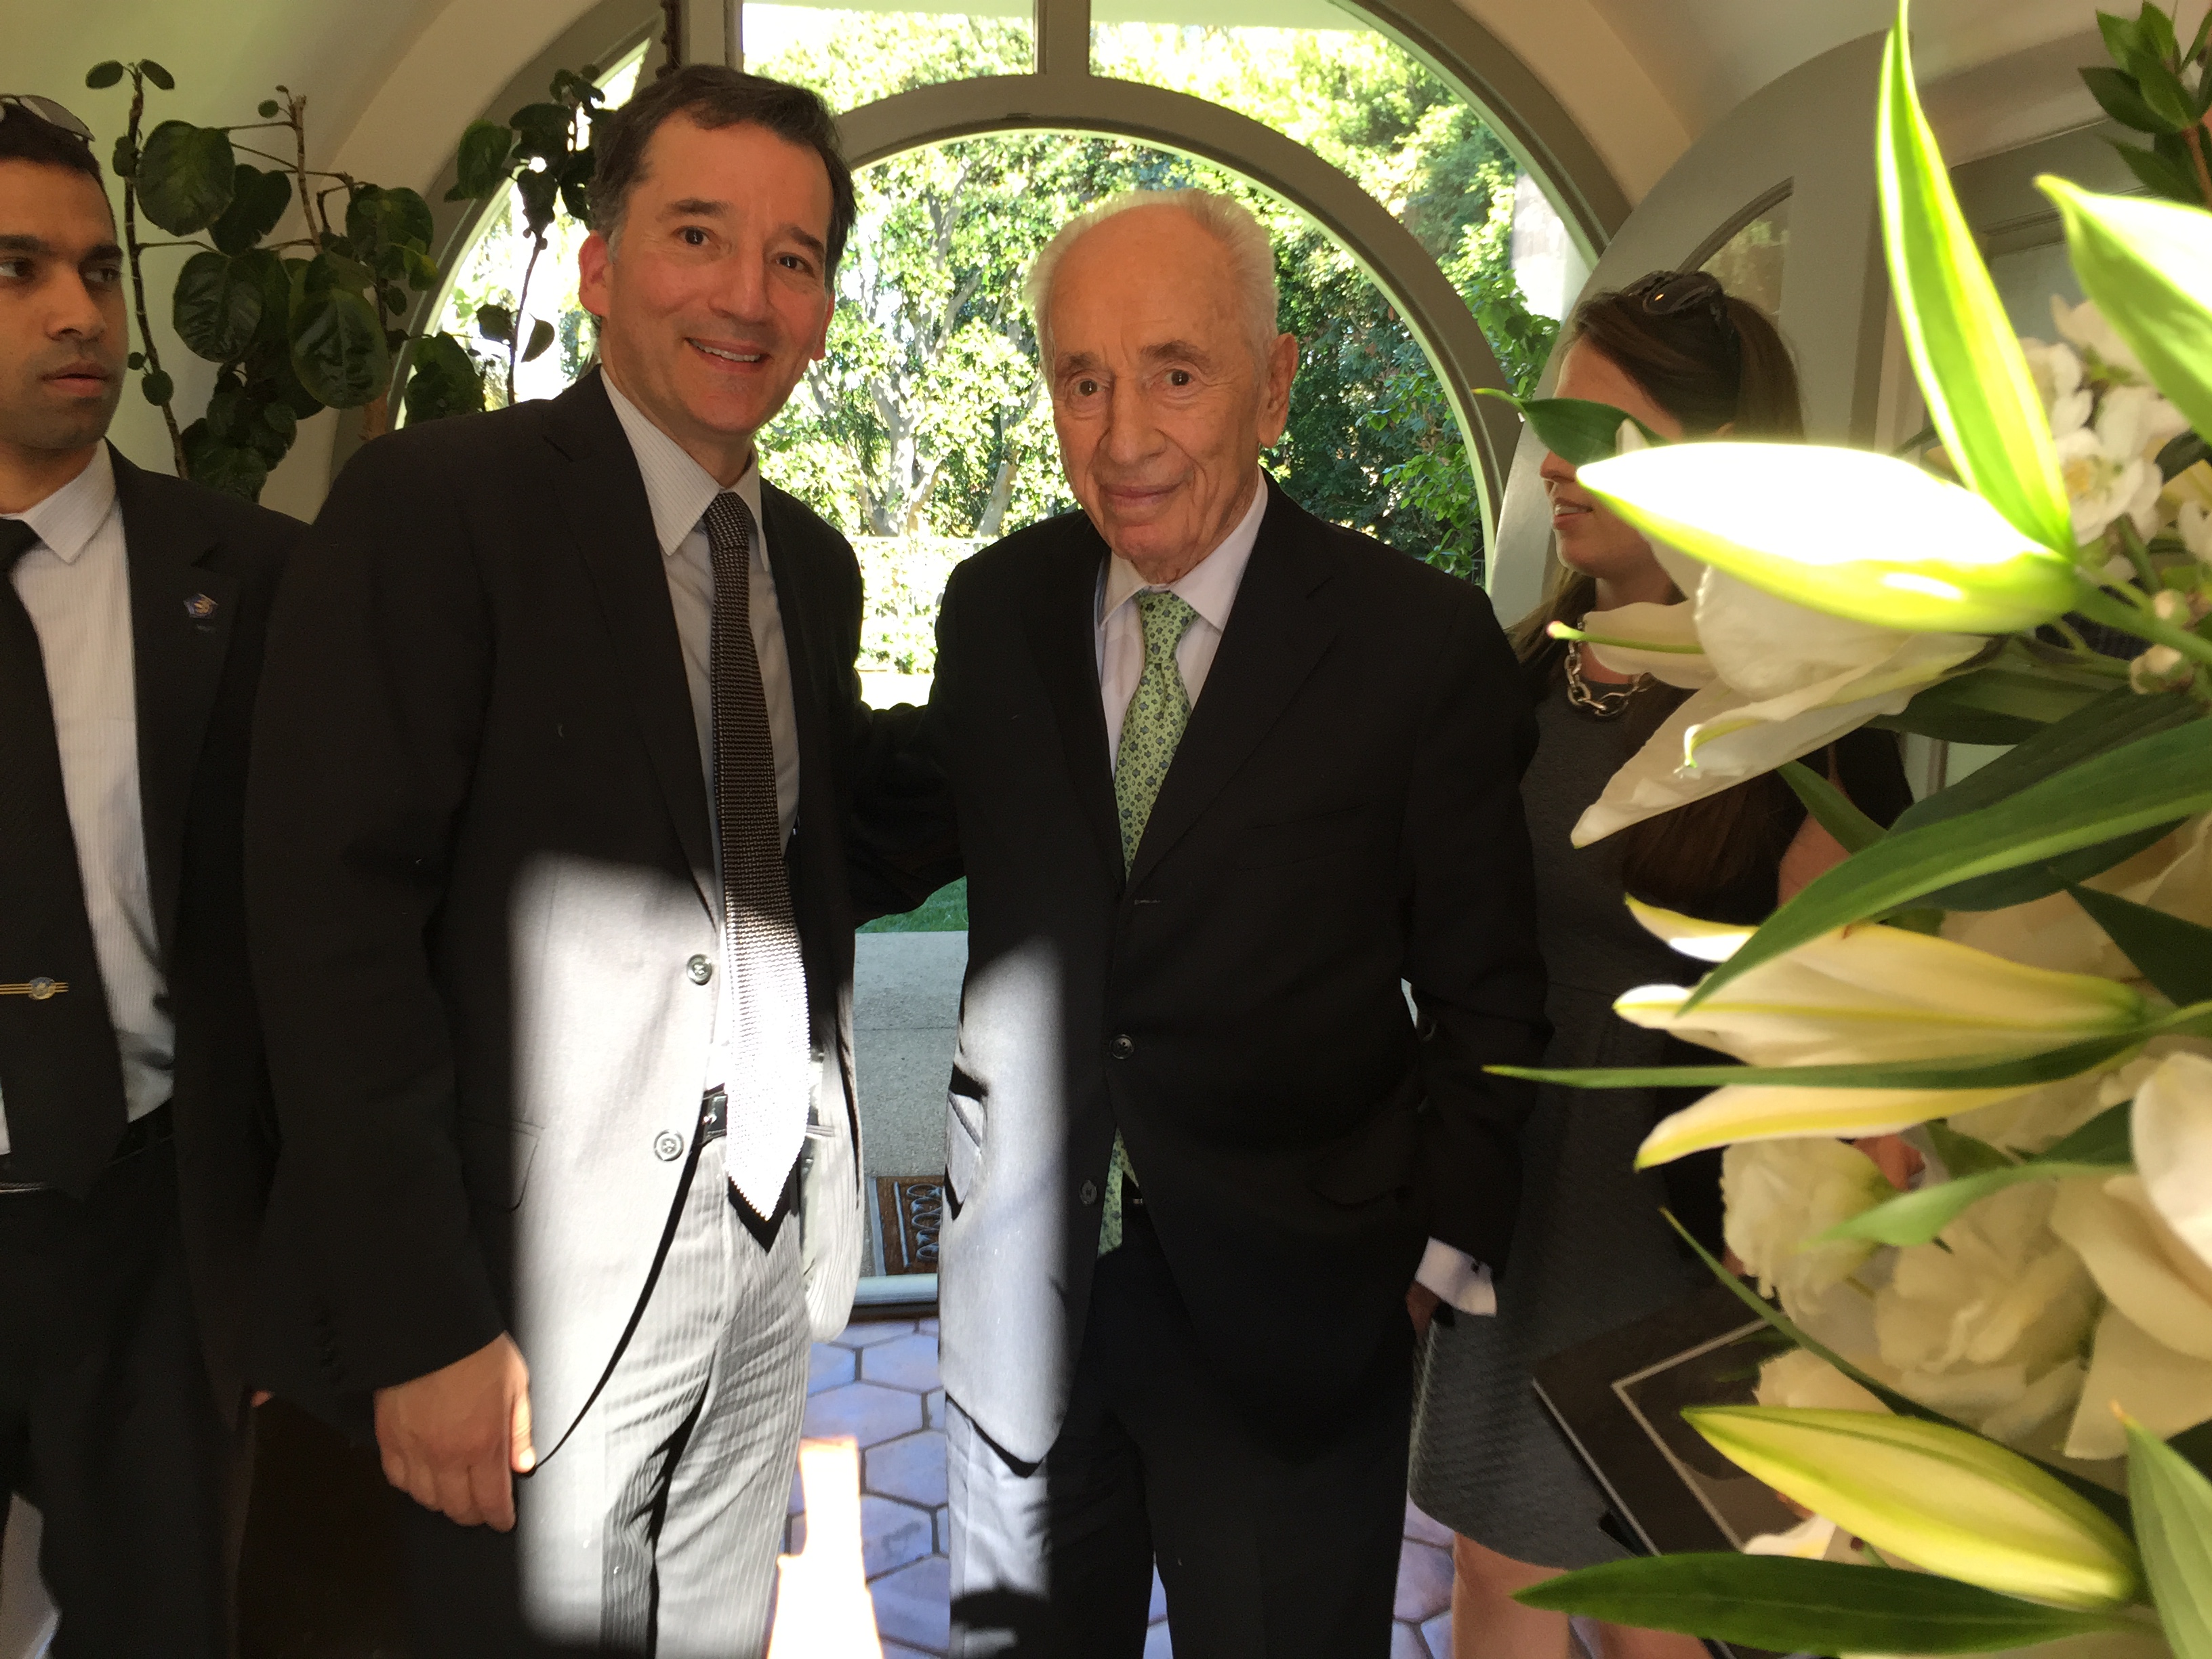 Rabbi David Wolpe and Shimon Peres at the home of Julie and Marc Platt in Los Angeles in February 2015. (Courtesy of author)